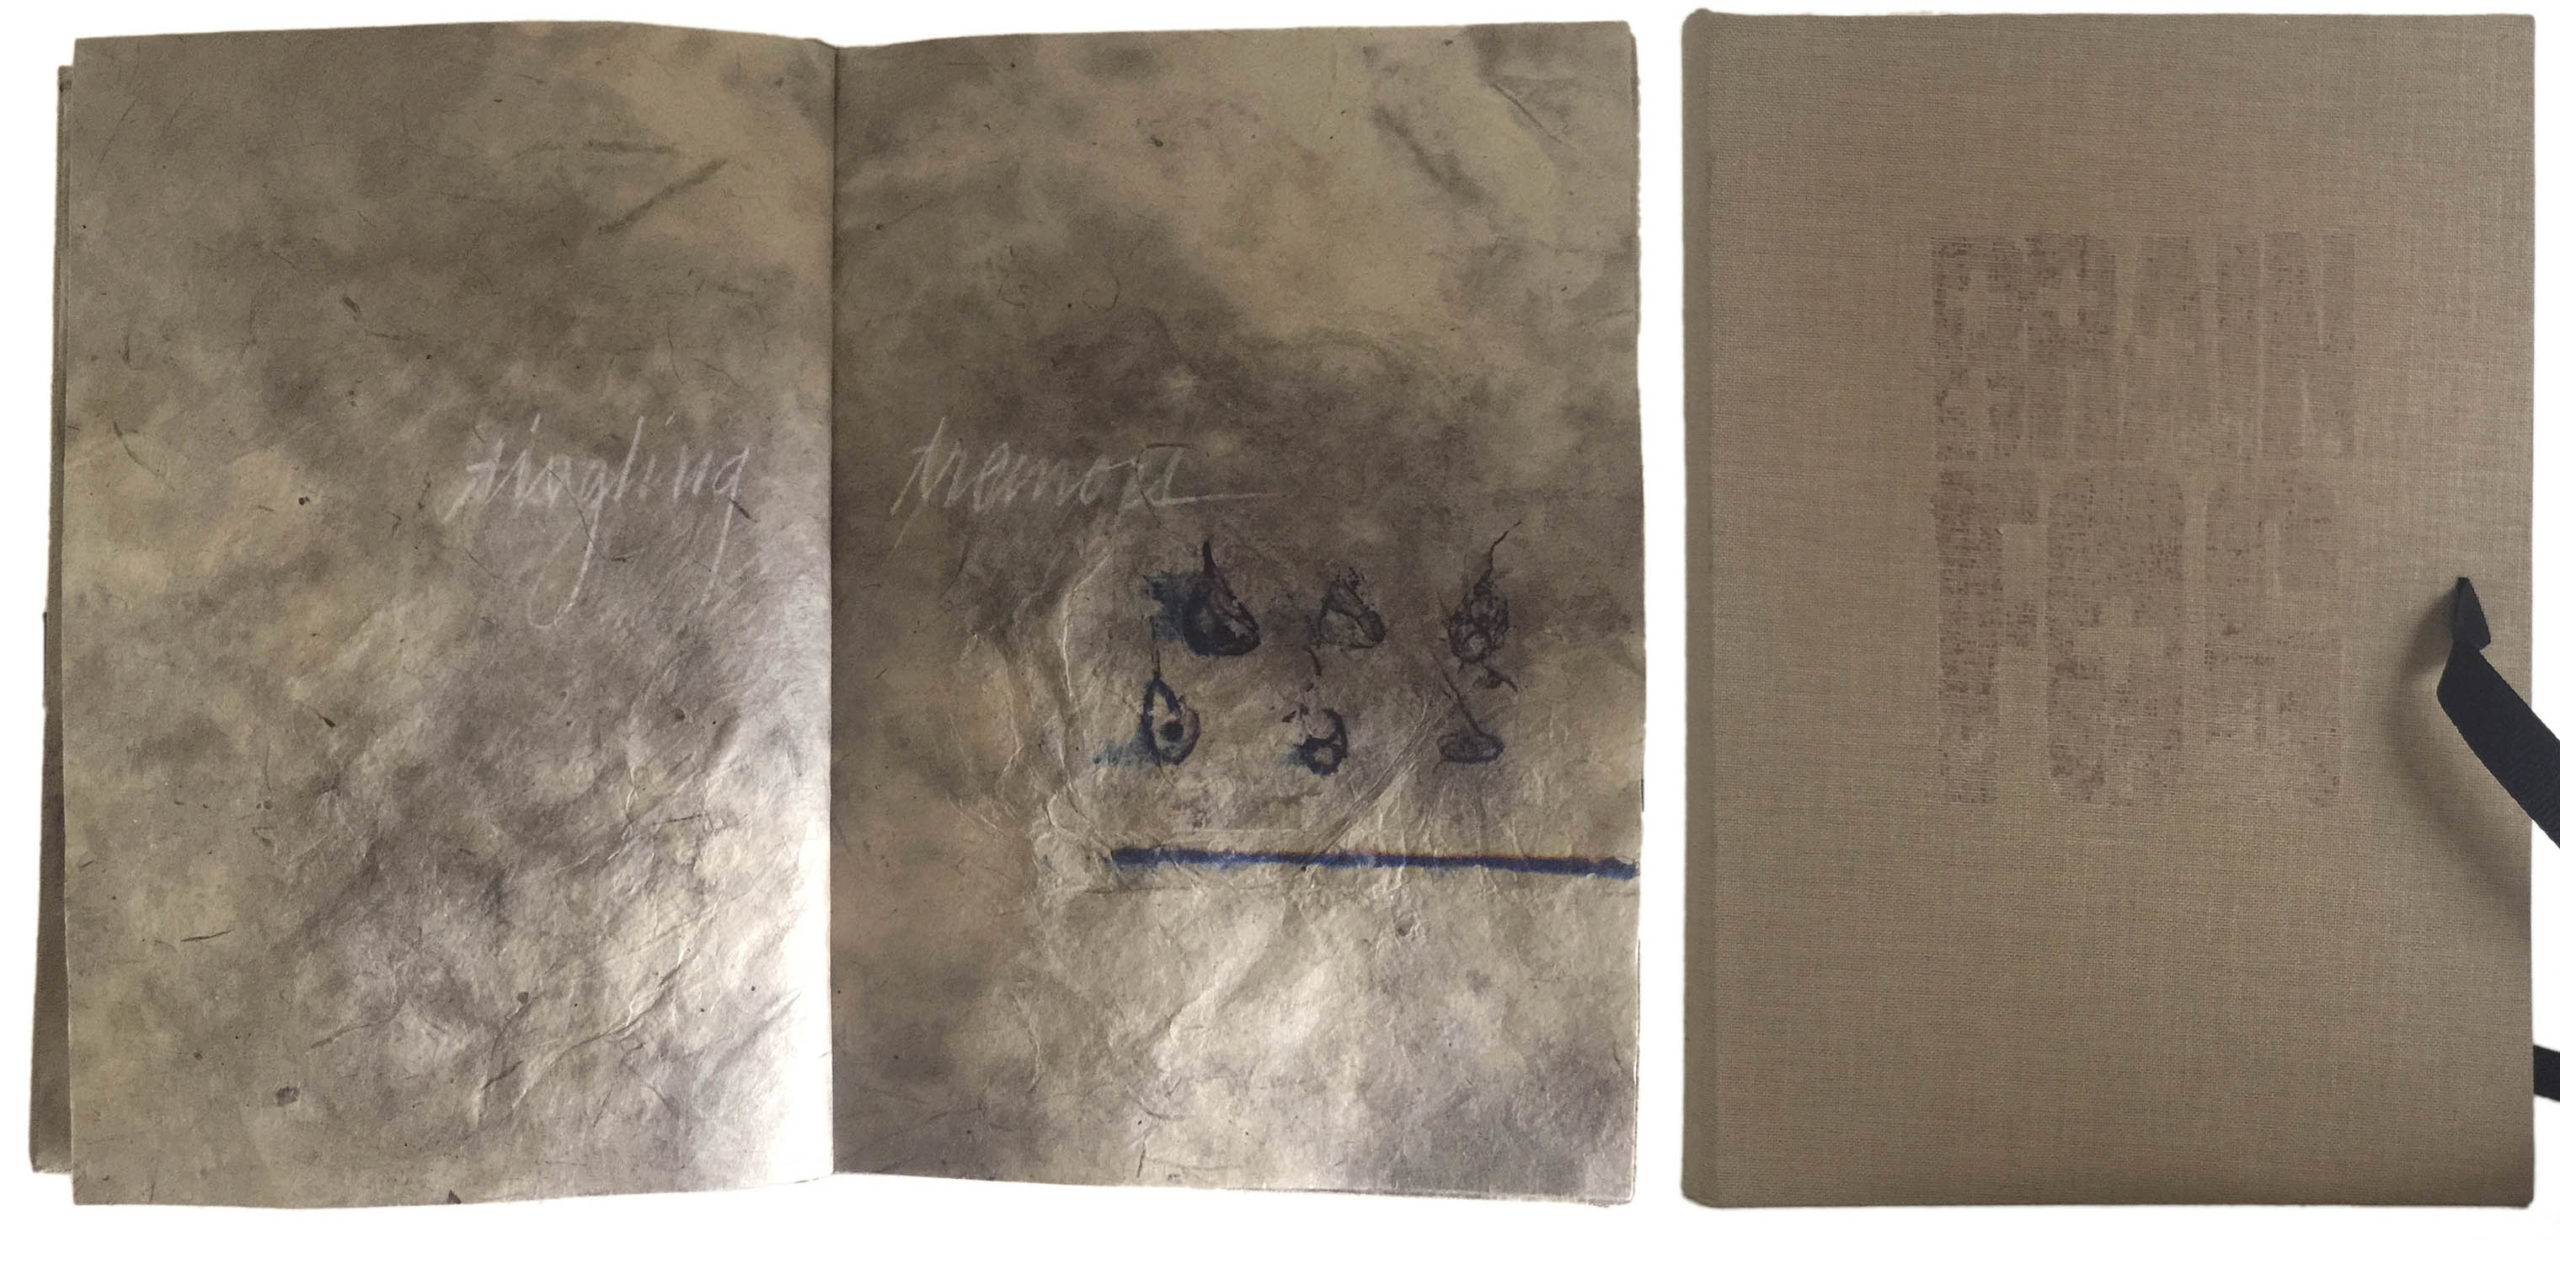 Brain Fog
One of the long term side effects of Covid-19 is called "brain fog". The title has been lightly engraved into the natural bookcloth cover using a font called Ambulance Shotgun. Related images have been transferred onto handmade lama li paper and handwritten text added. Brain Fog, 7.5” x 5”, 34 pages